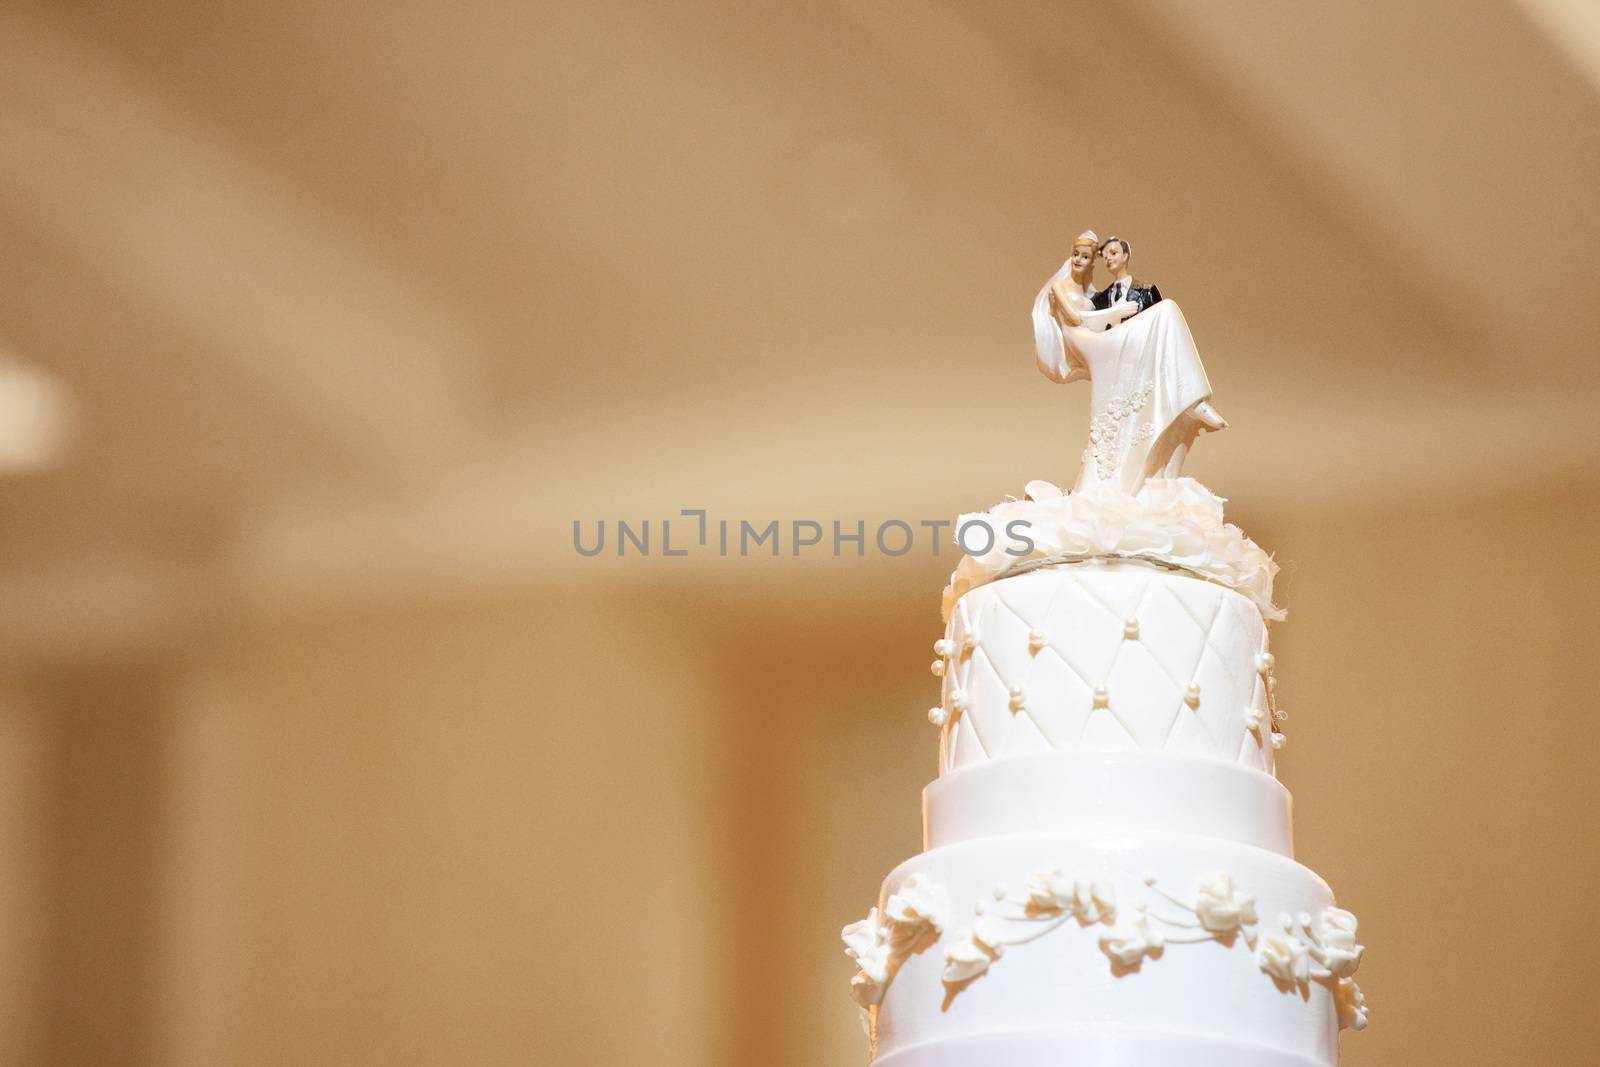 wedding cake with bride and groom dolls on top with blank copyspace